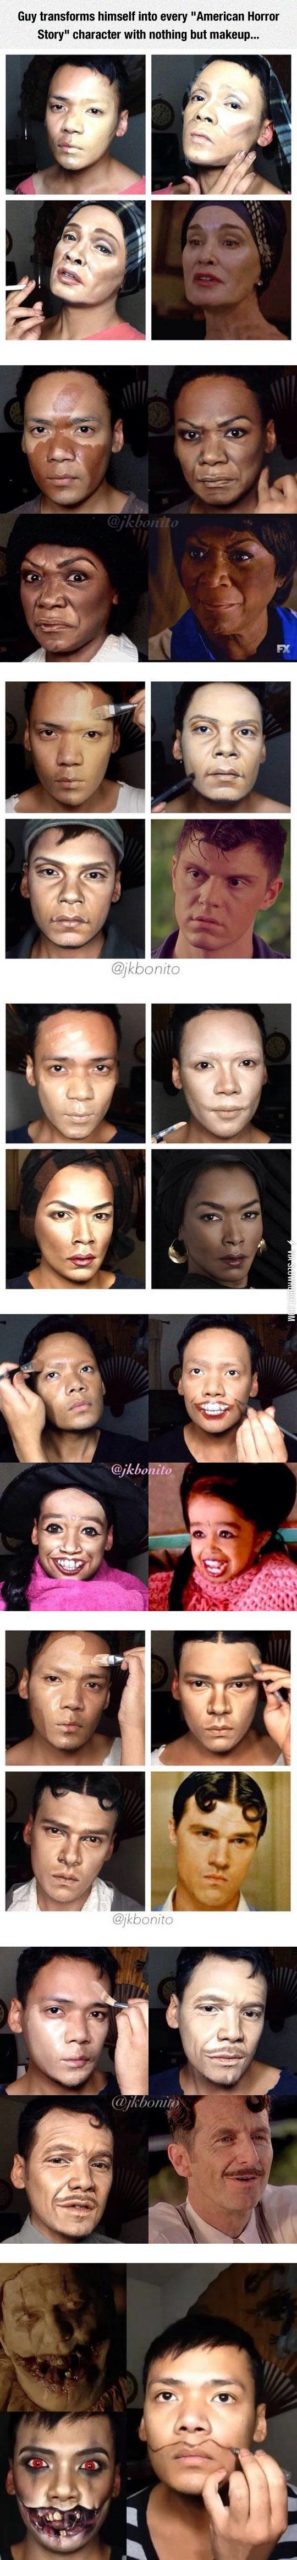 The+power+of+makeup